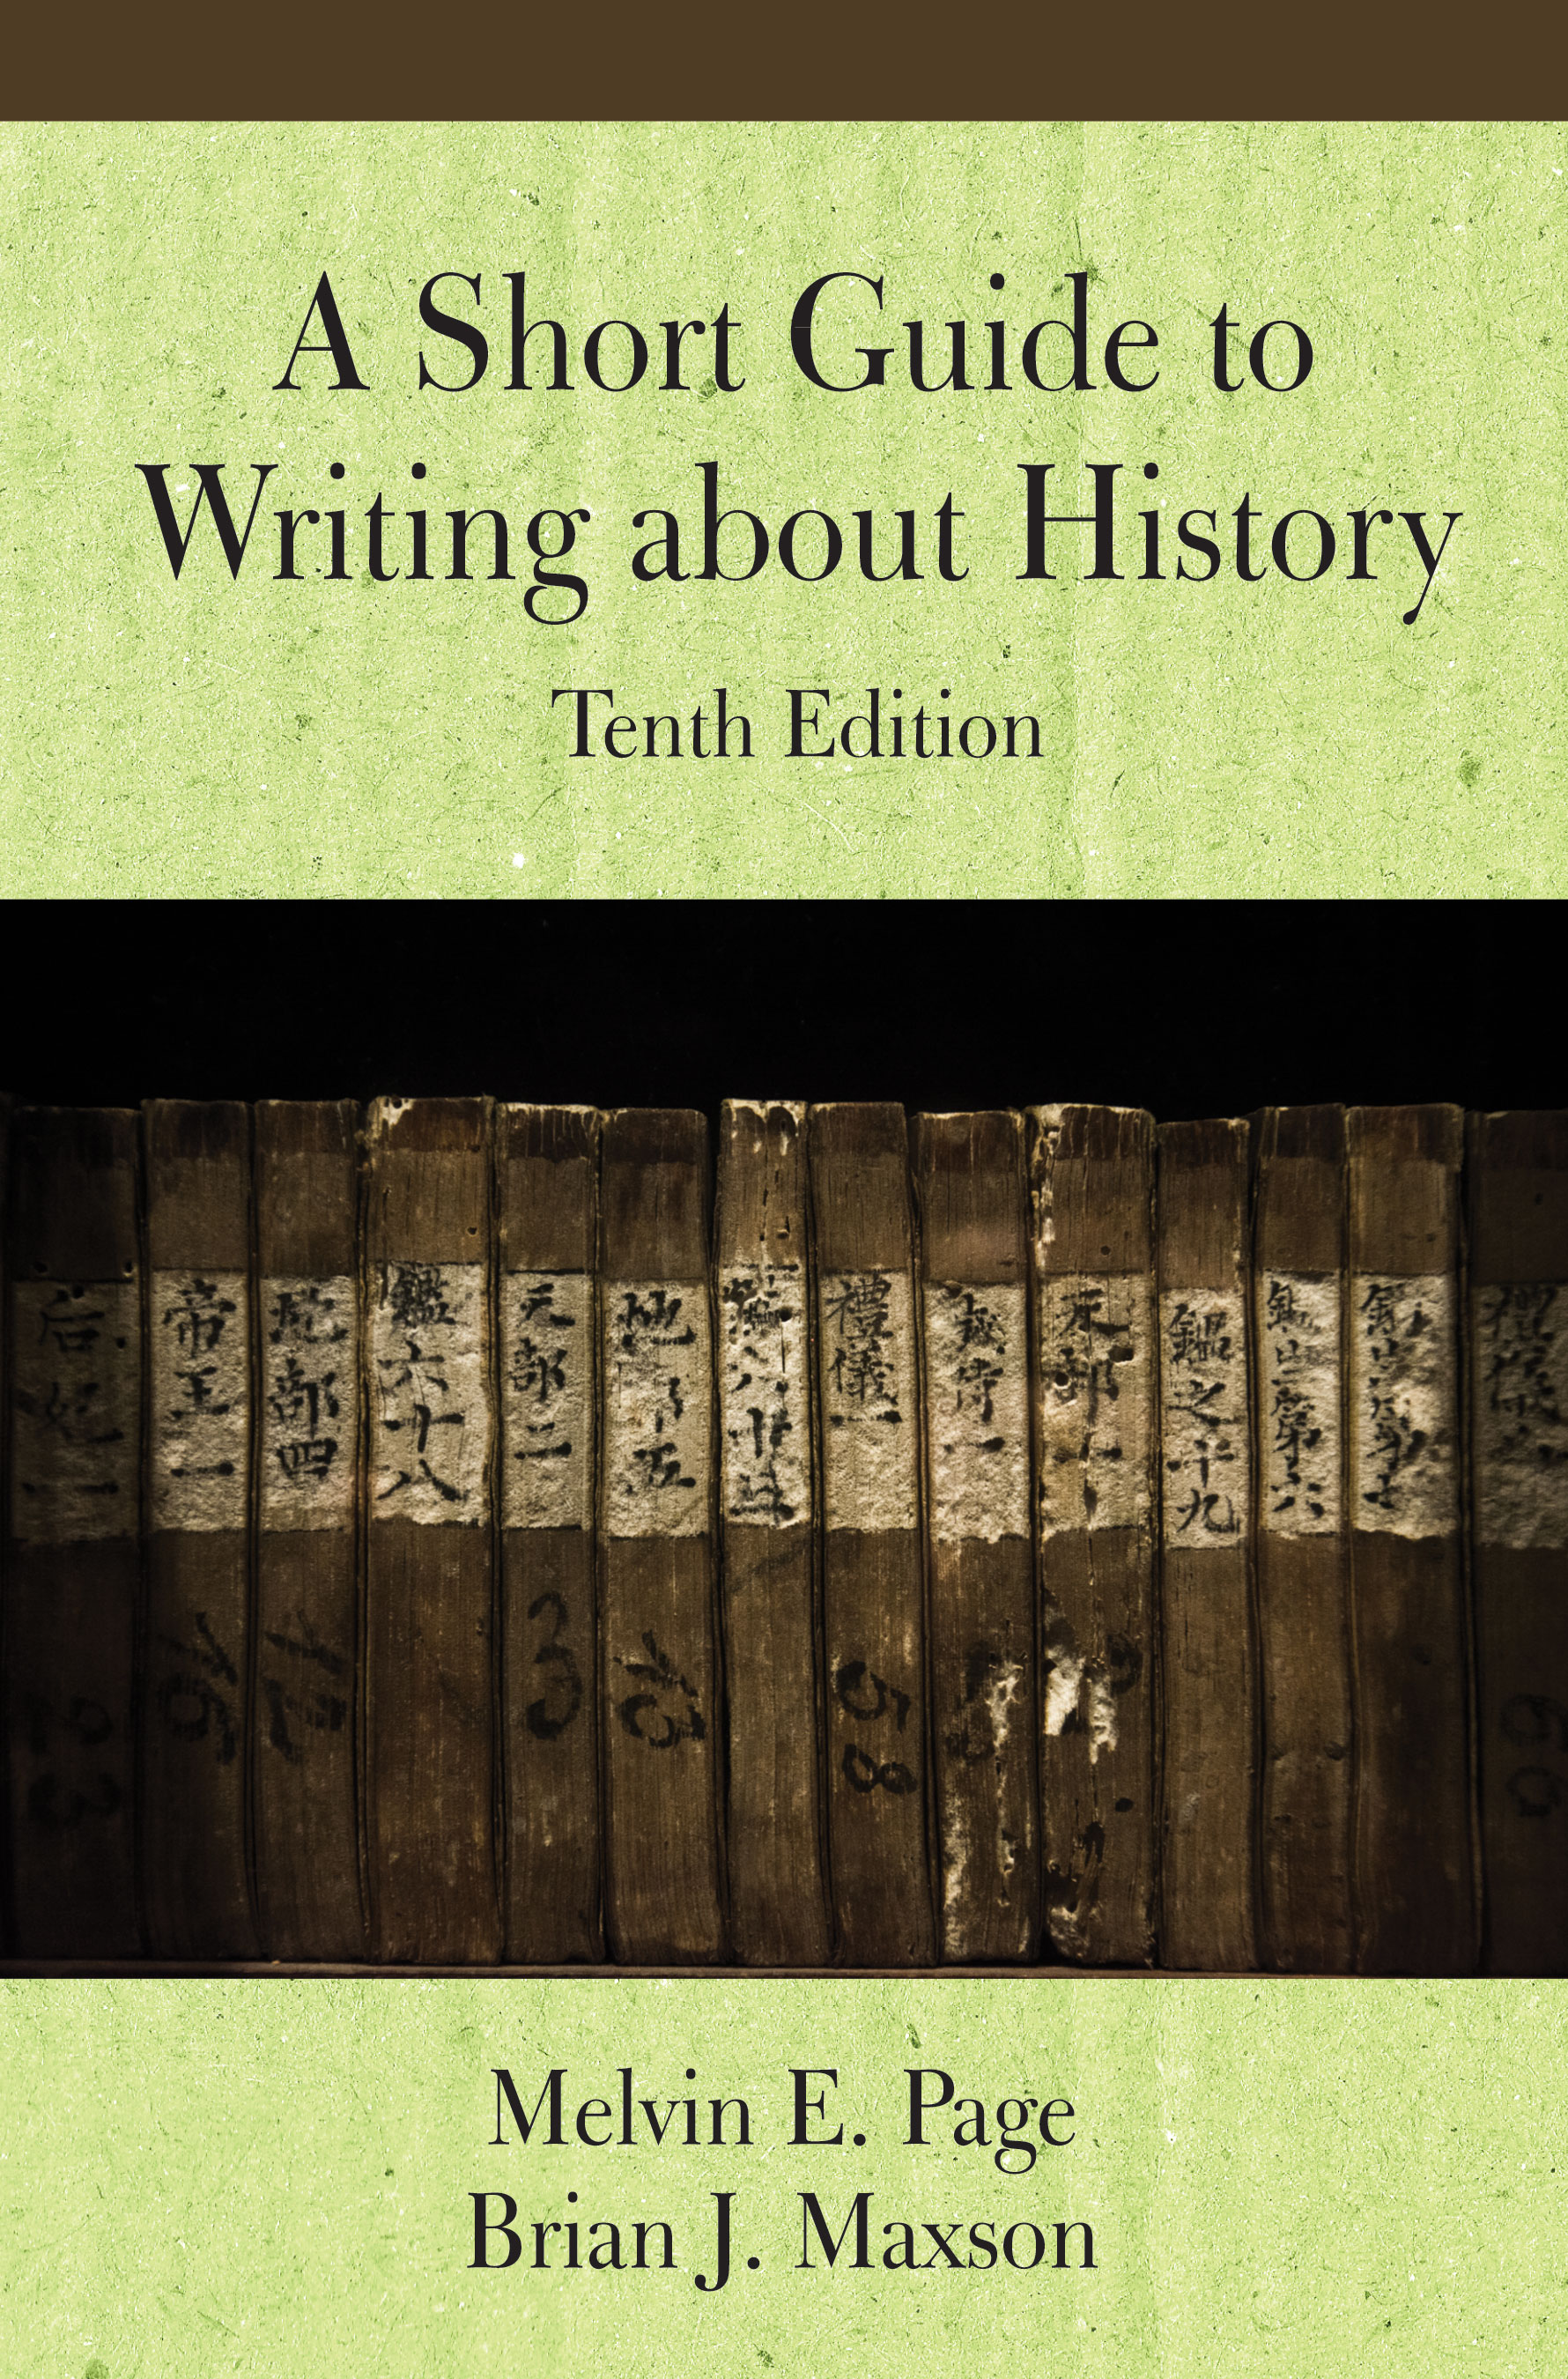 A Short Guide to Writing about History:  by Melvin E. Page, Brian J. Maxson